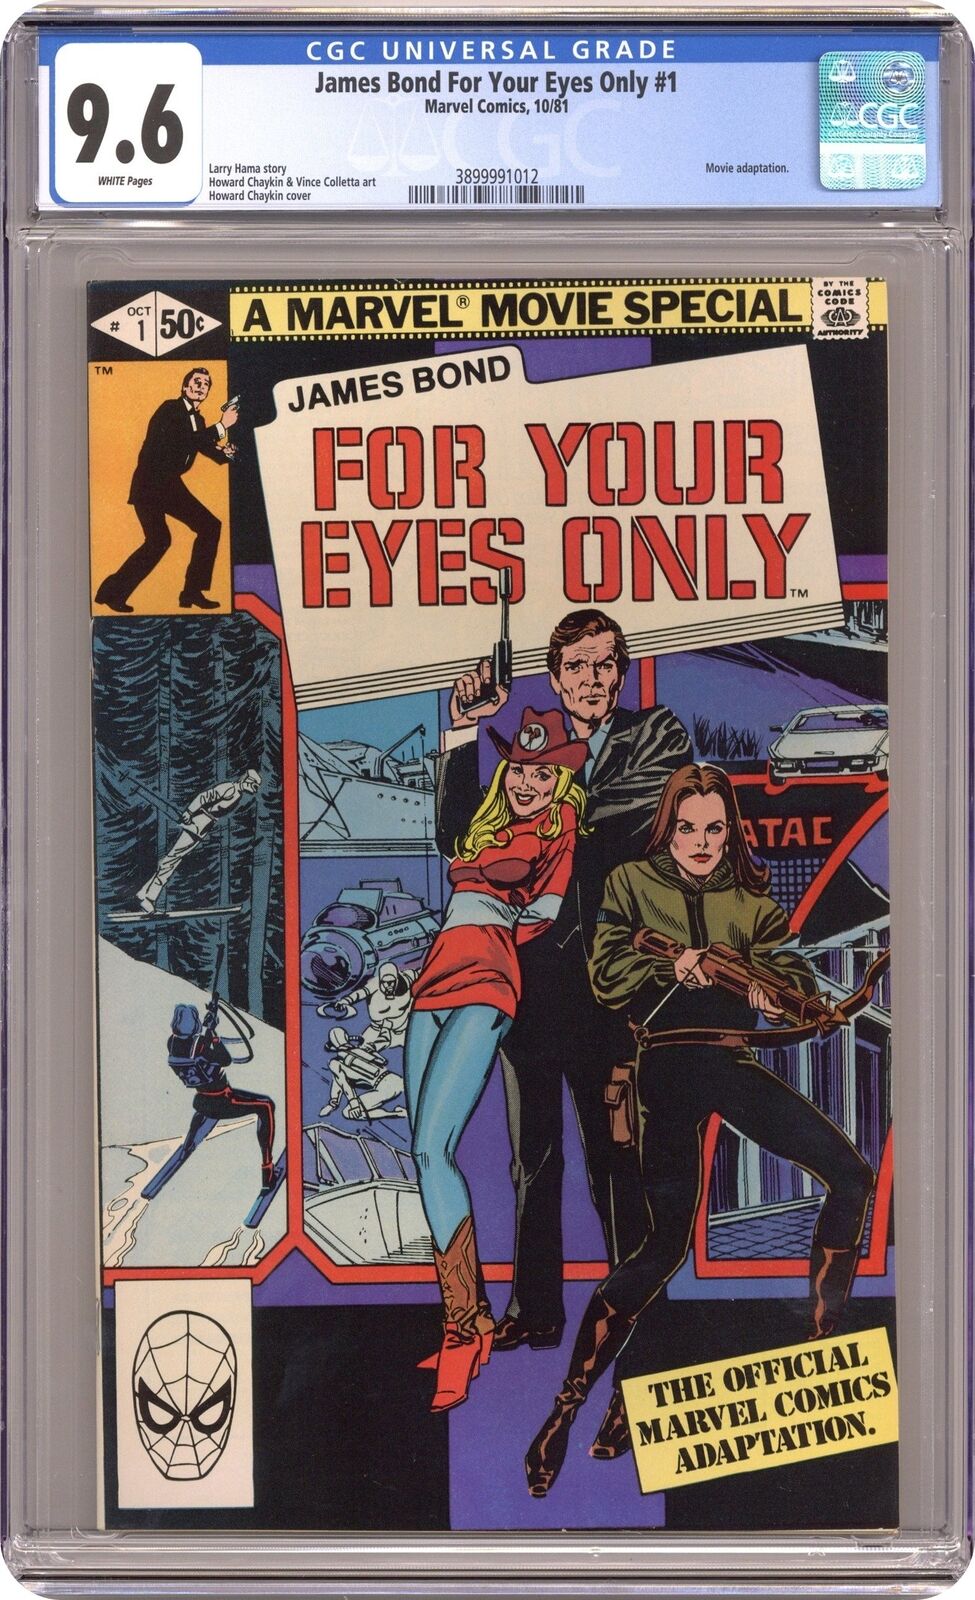 James Bond For Your Eyes Only #1 CGC 9.6 1981 3899991012